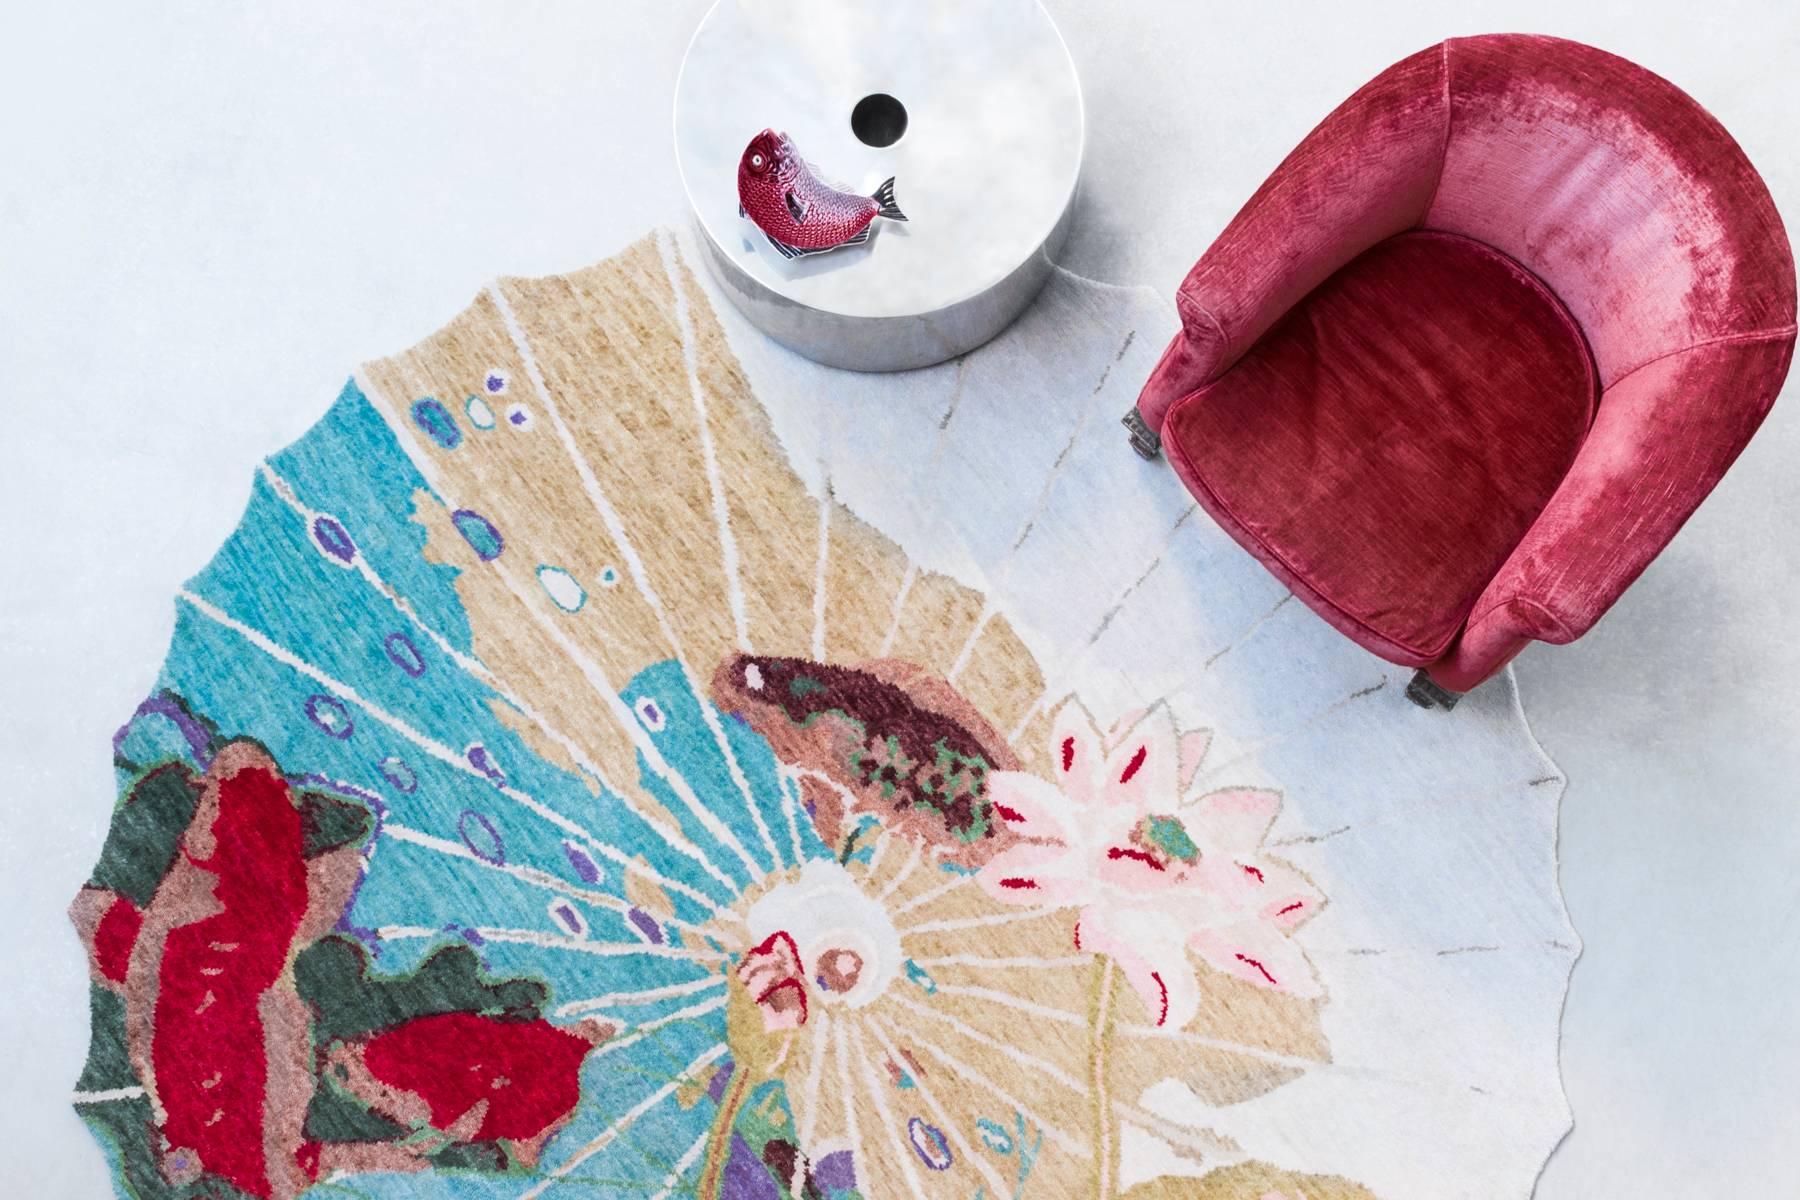 Ike e Koi, in Japanese language respectively ‘pond’ and ‘carp’ are two pure wool carpets in the shape of old Chinese paper umbrellas made in India by the best artisans. The project is the result of a trip to Asia and of the study of ancient Japanese